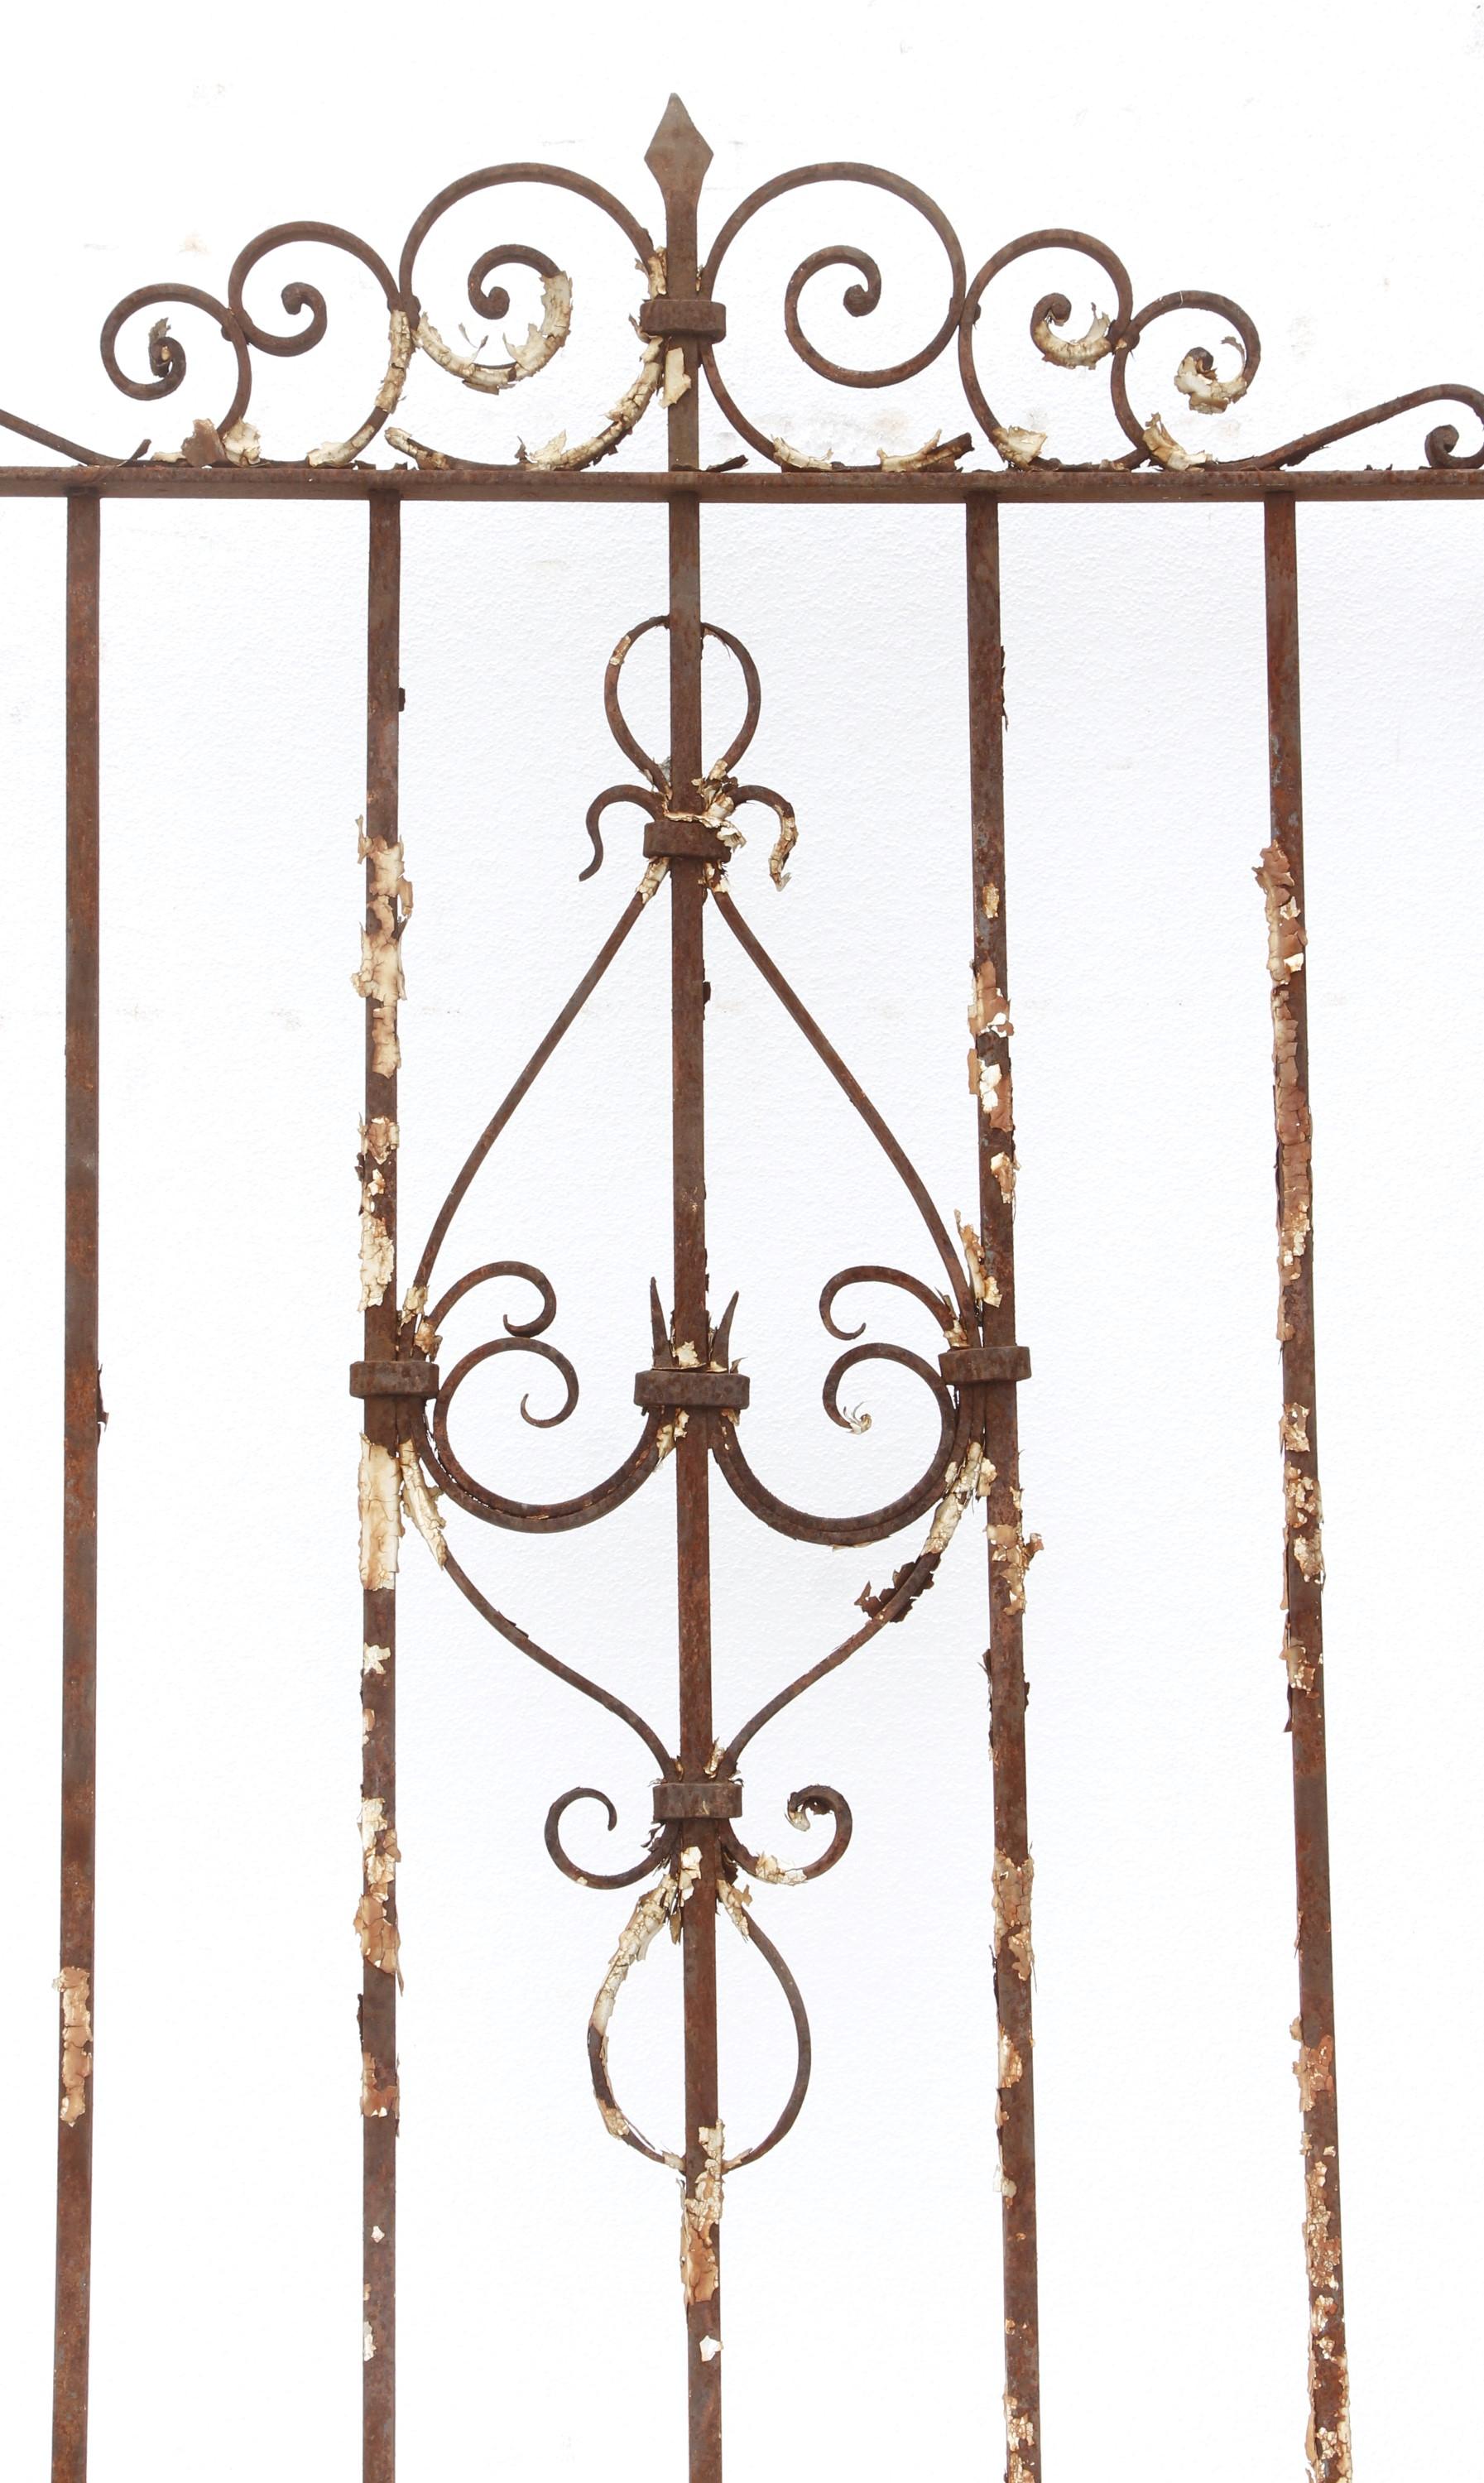 Victorian style wrought iron brownstone window guard. This ornate iron has a natural rust patina. Measures: 67.75 x 39.5. Please note, this item is located in our Scranton, PA location.